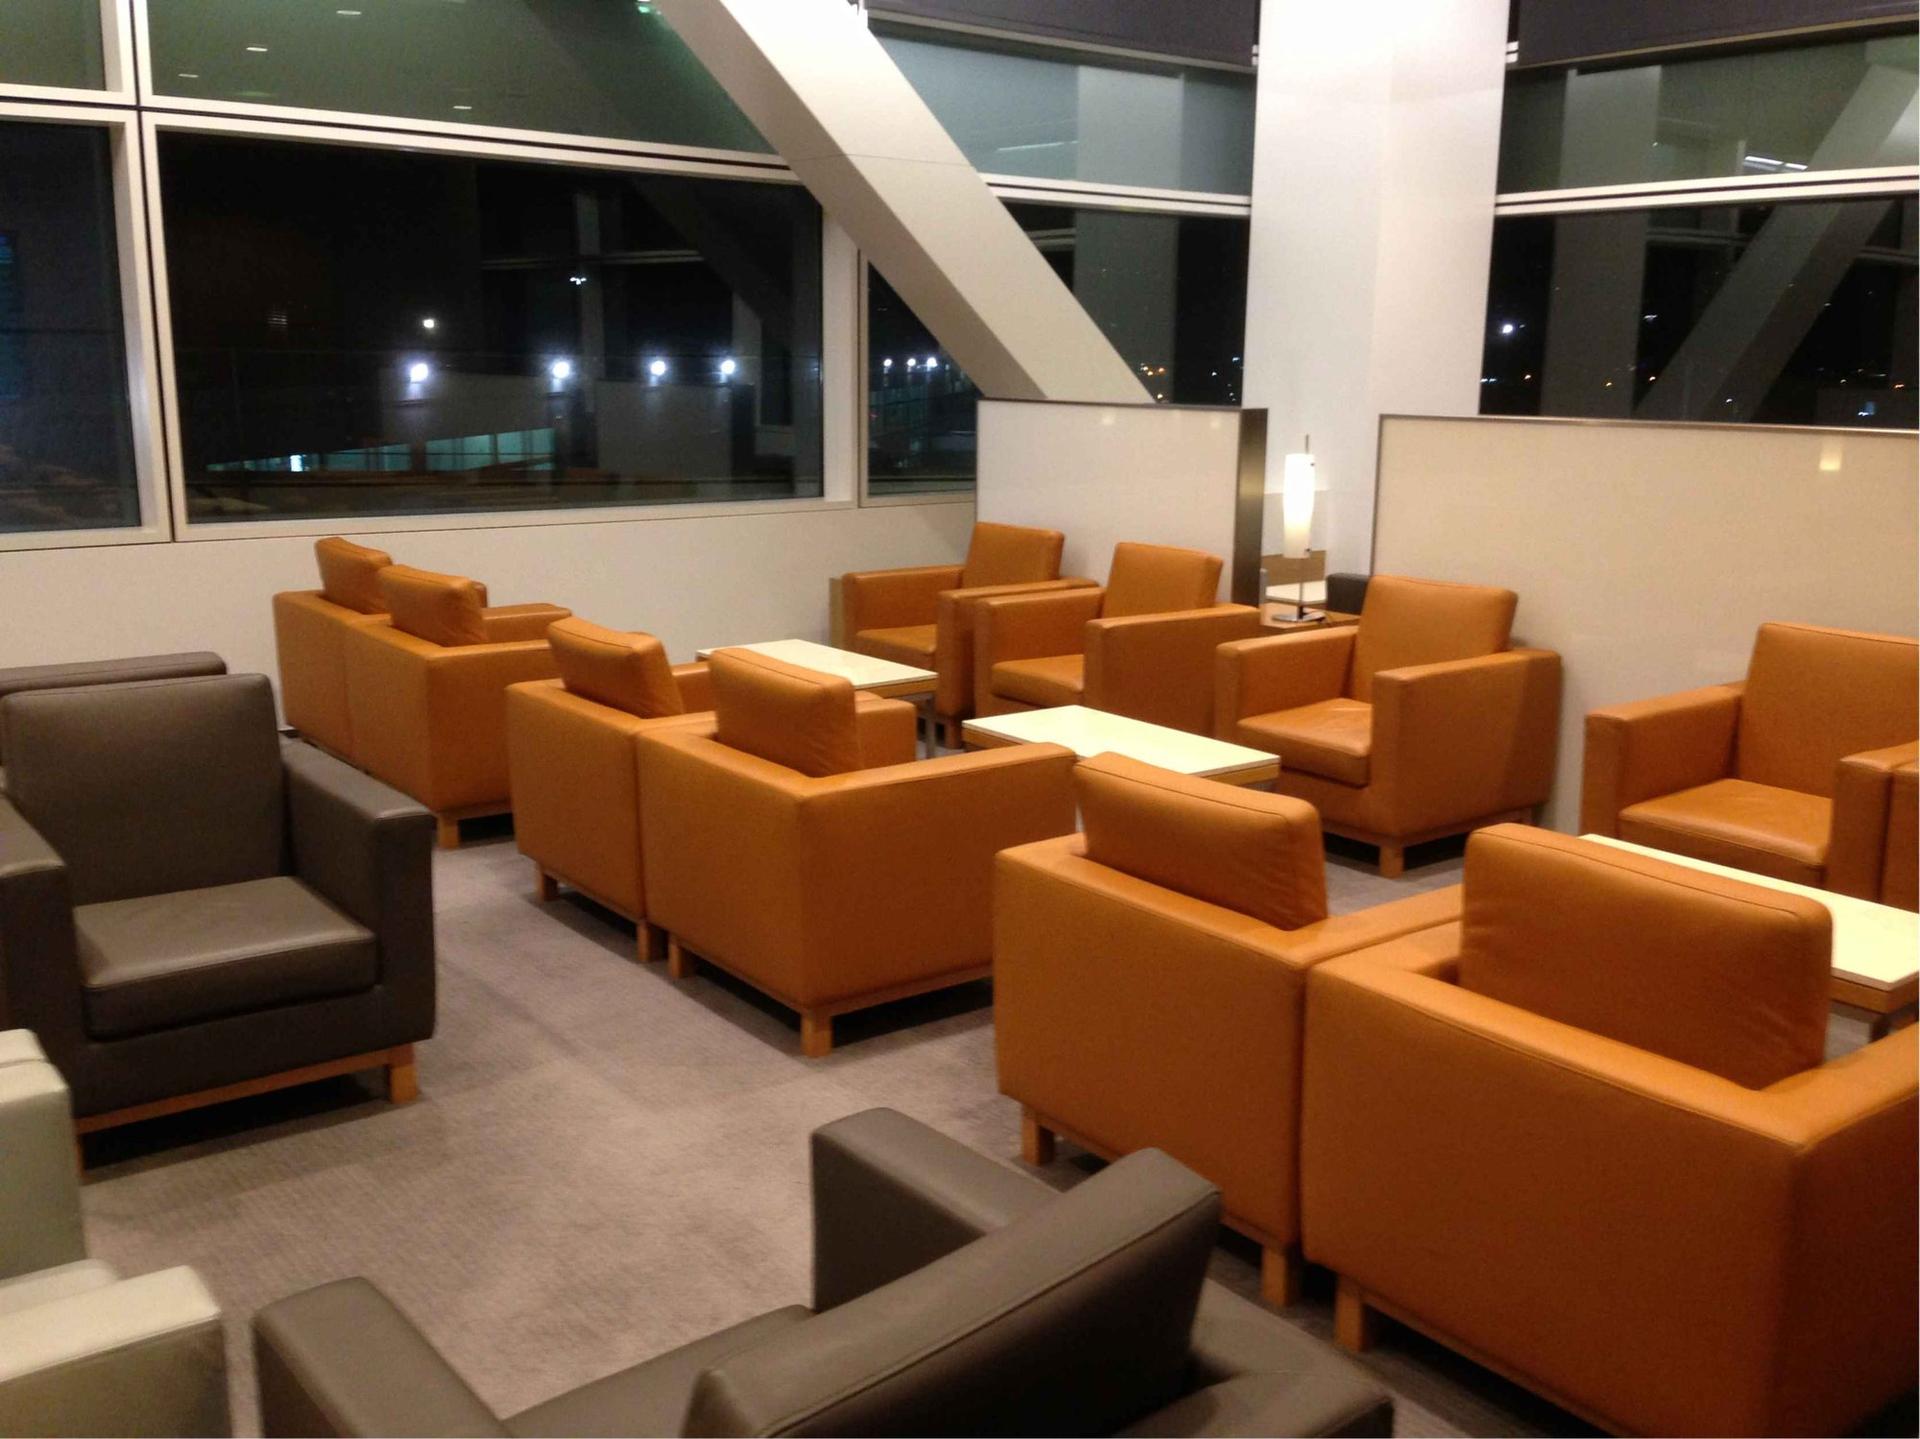 Cathay Pacific First and Business Class Lounge image 7 of 74